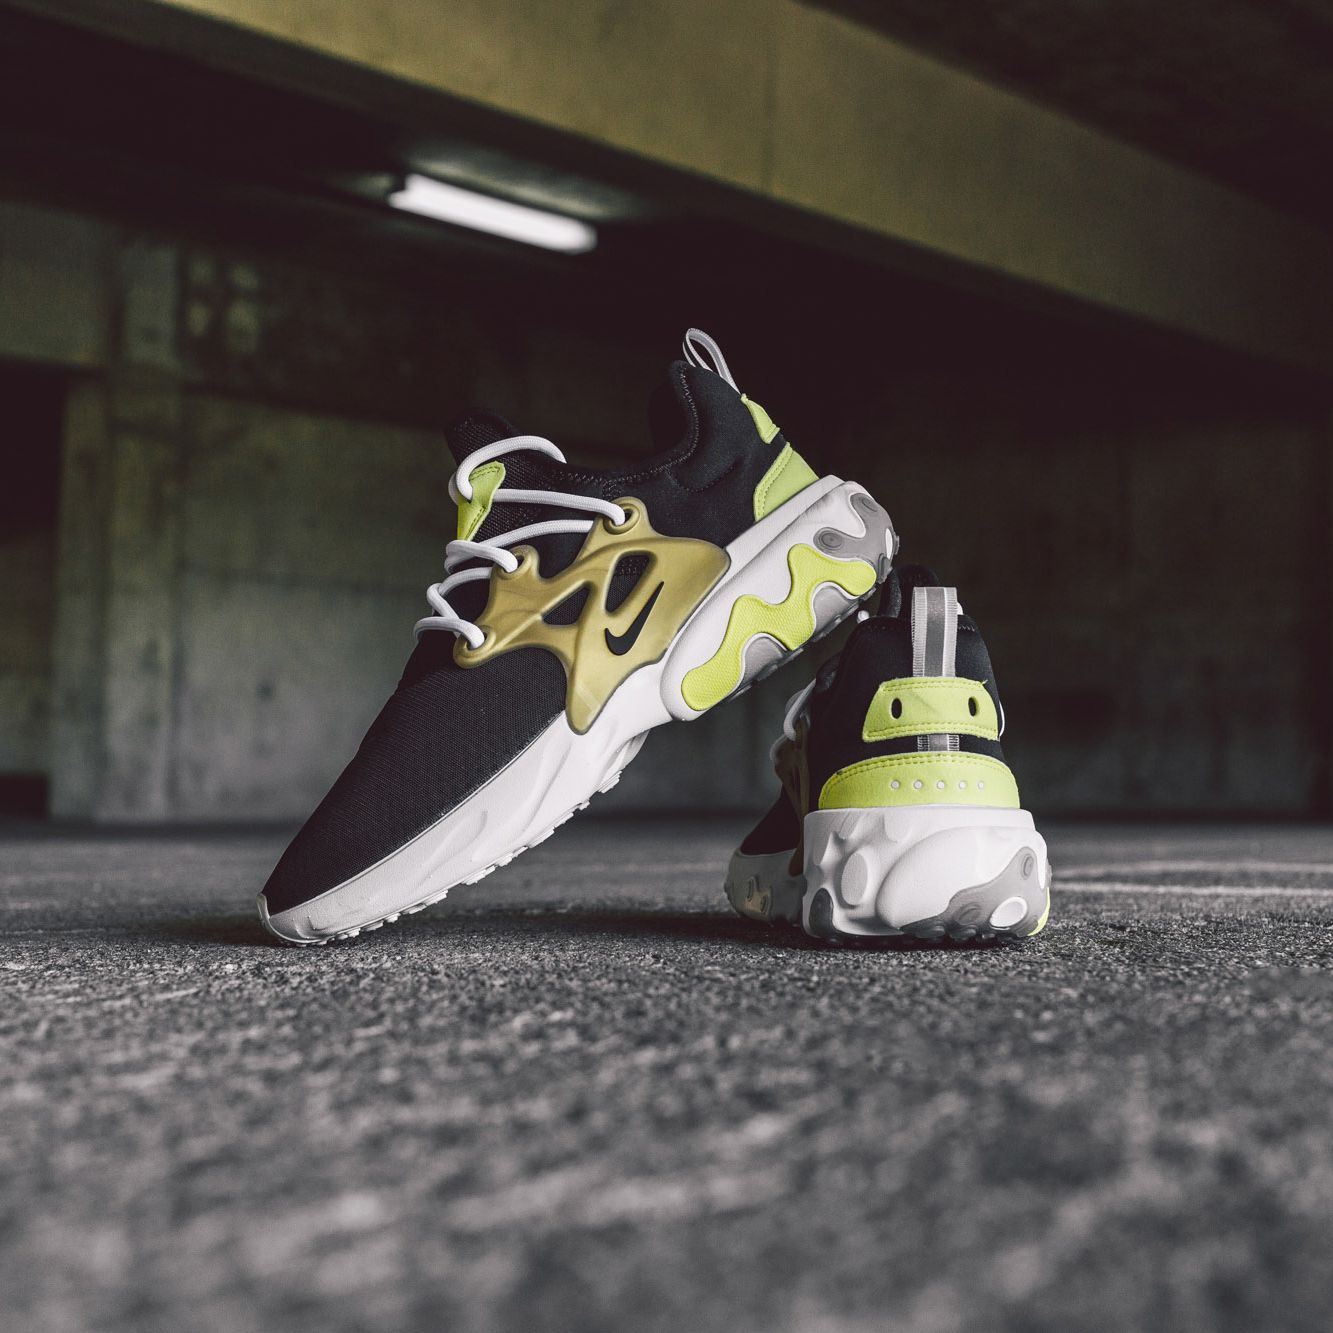 on Twitter: "The Nike React Presto - Brutal Honey is available now online at https://t.co/5tur2hwo8S to purchase. https://t.co/flUOxcOqgK" /